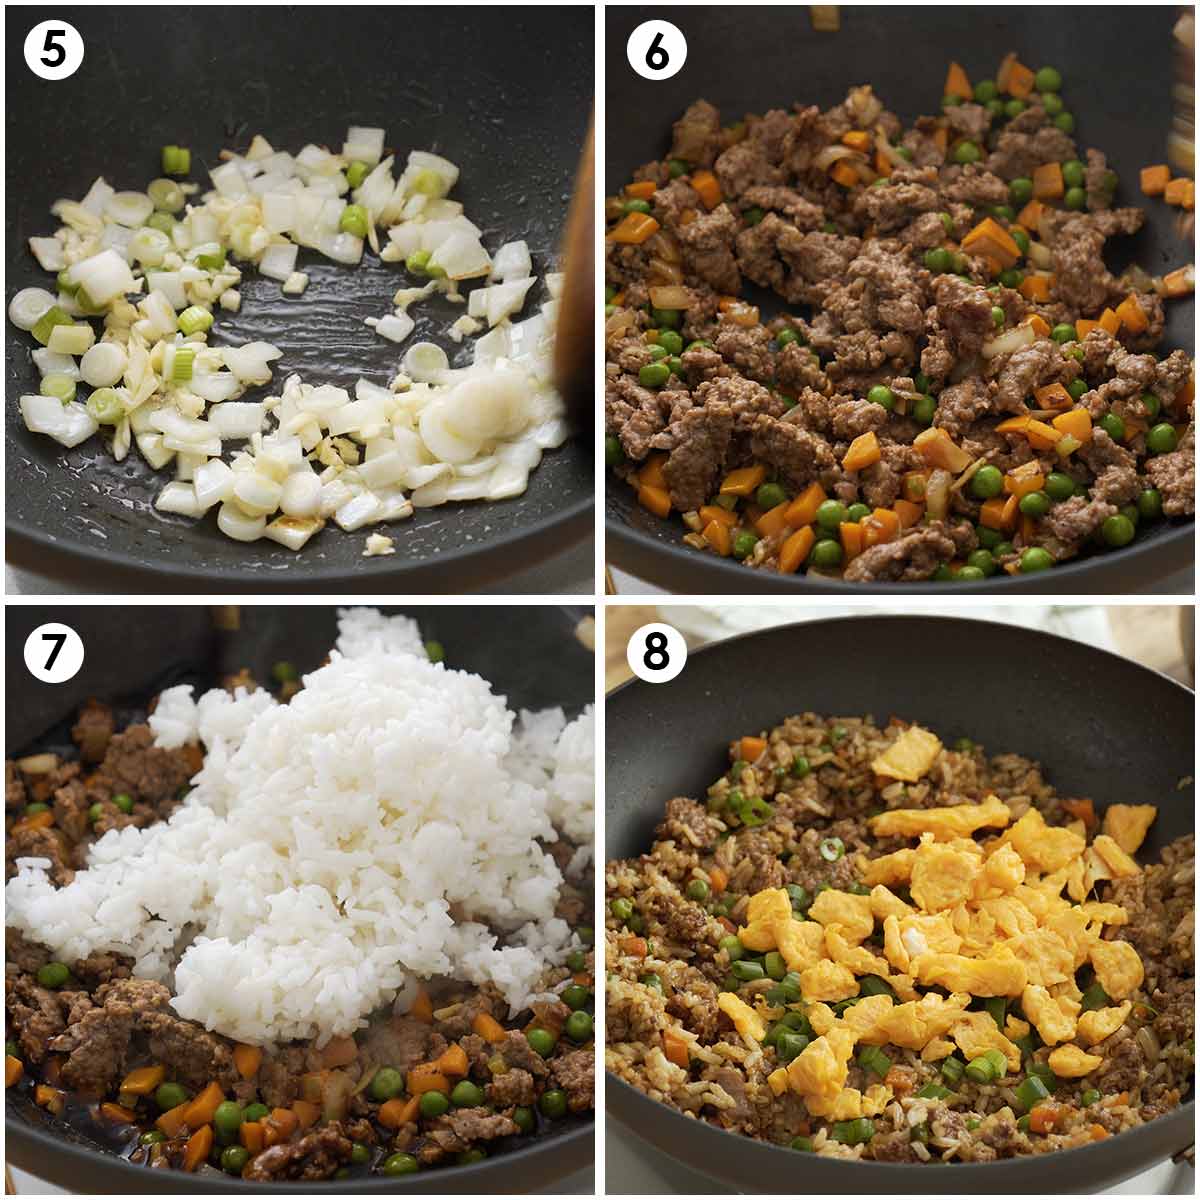 4 image collage showing how to stir fry rice with vegetables, ground meat, and egg. 